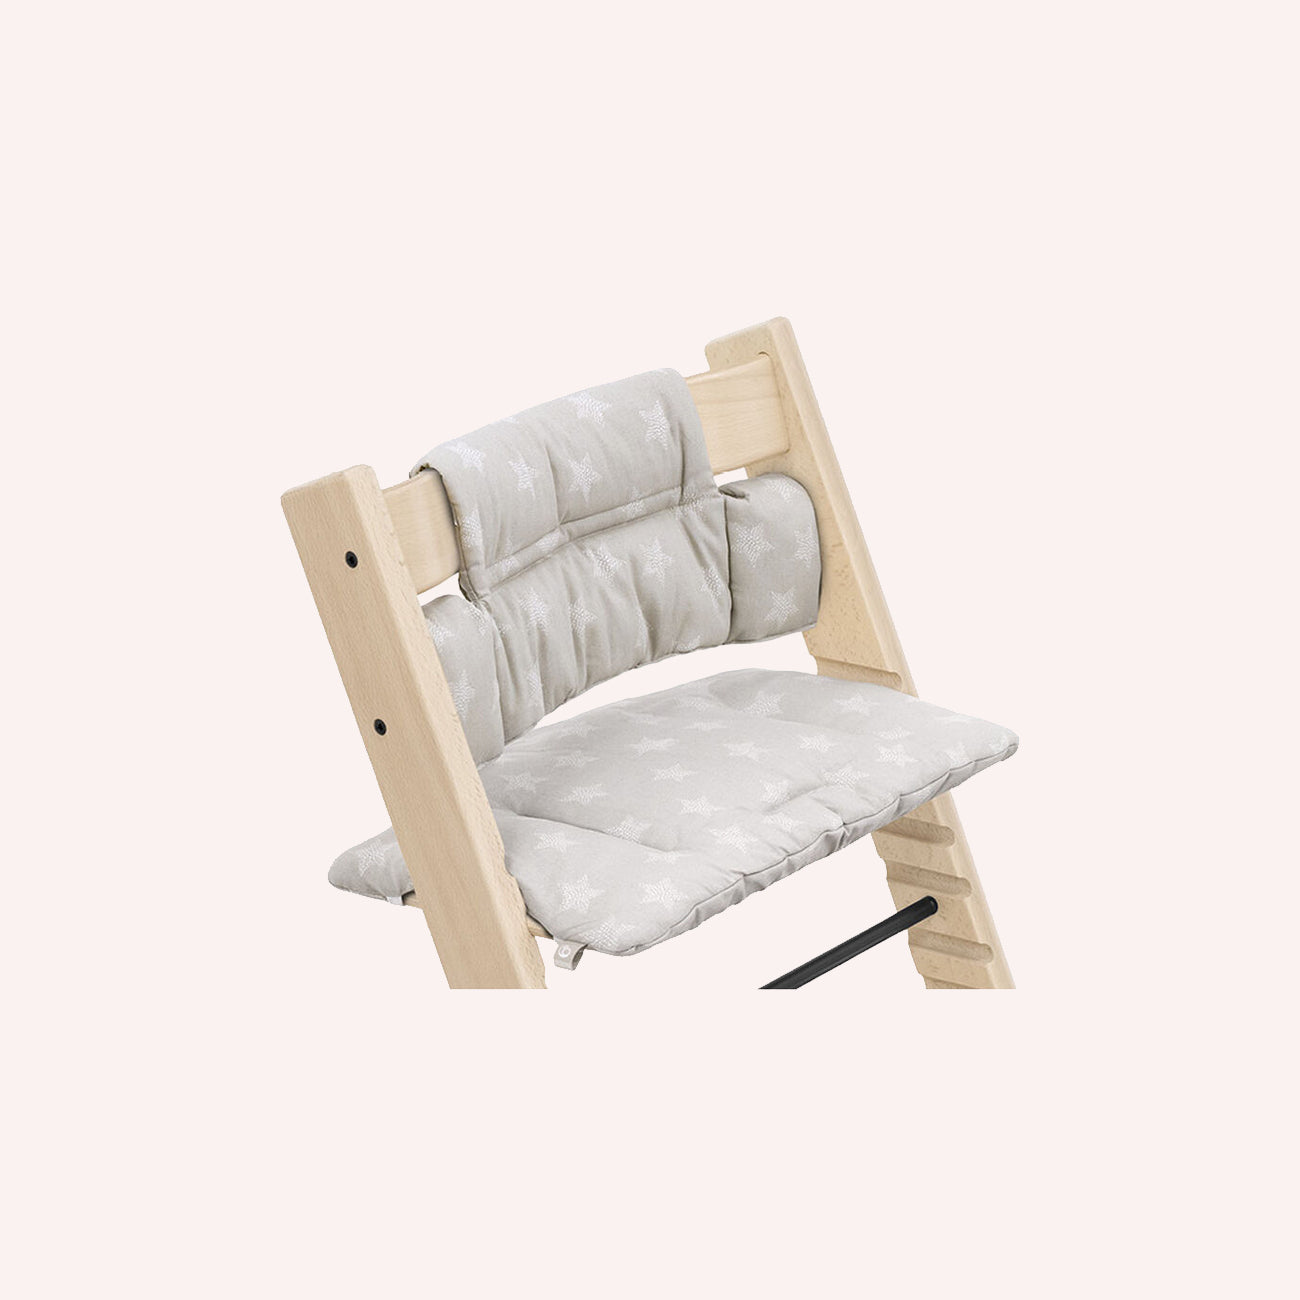 Tripp Trapp High Chair: Complete White with Silver Stars Cushion